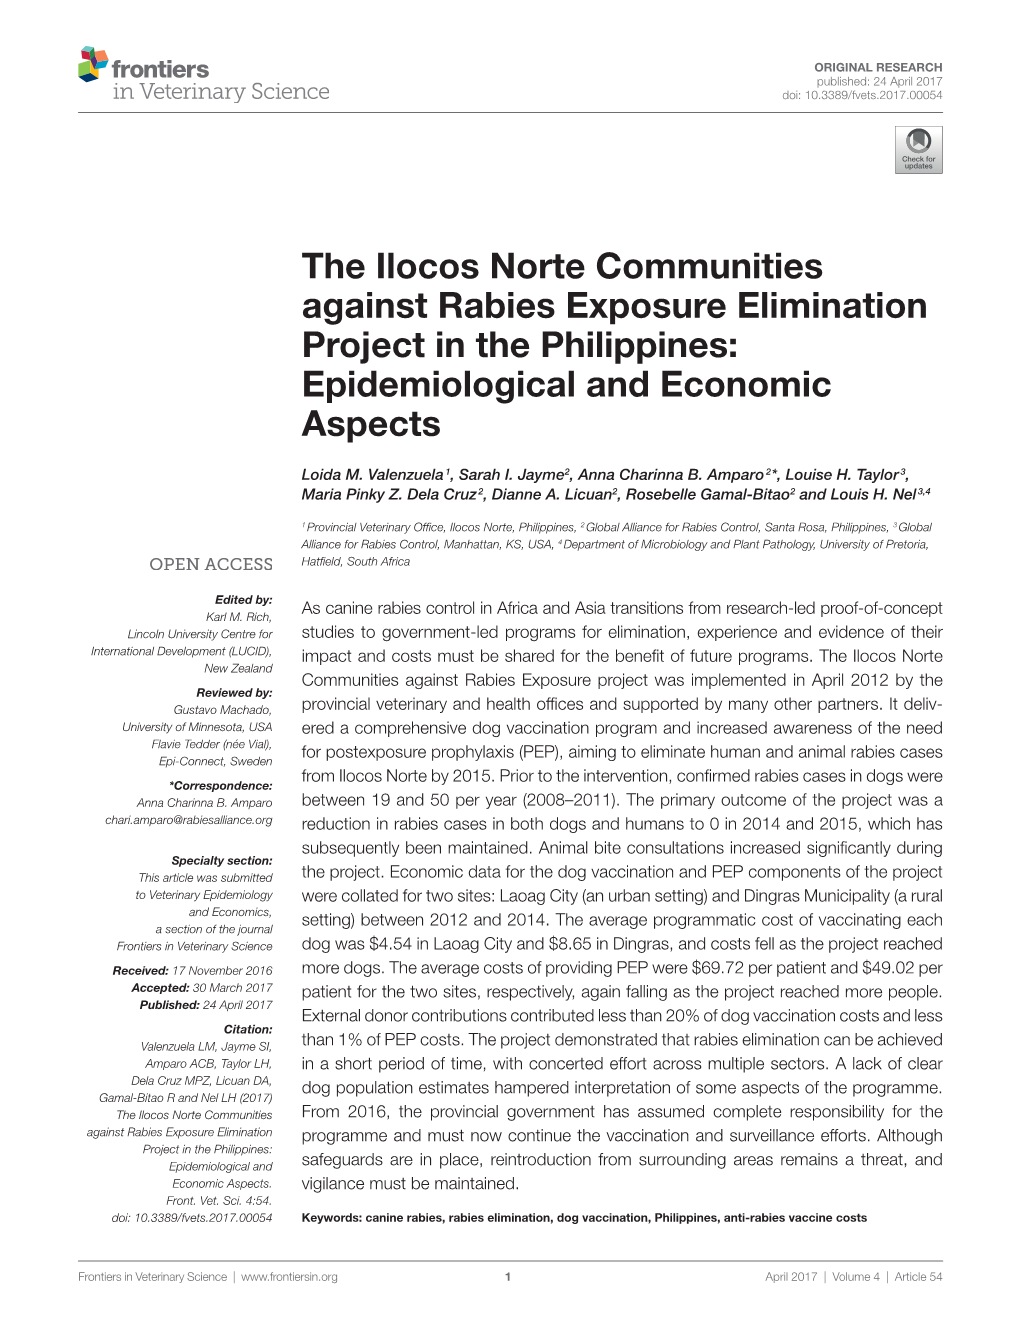 The Ilocos Norte Communities Against Rabies Exposure Elimination Project in the Philippines: Epidemiological and Economic Aspects